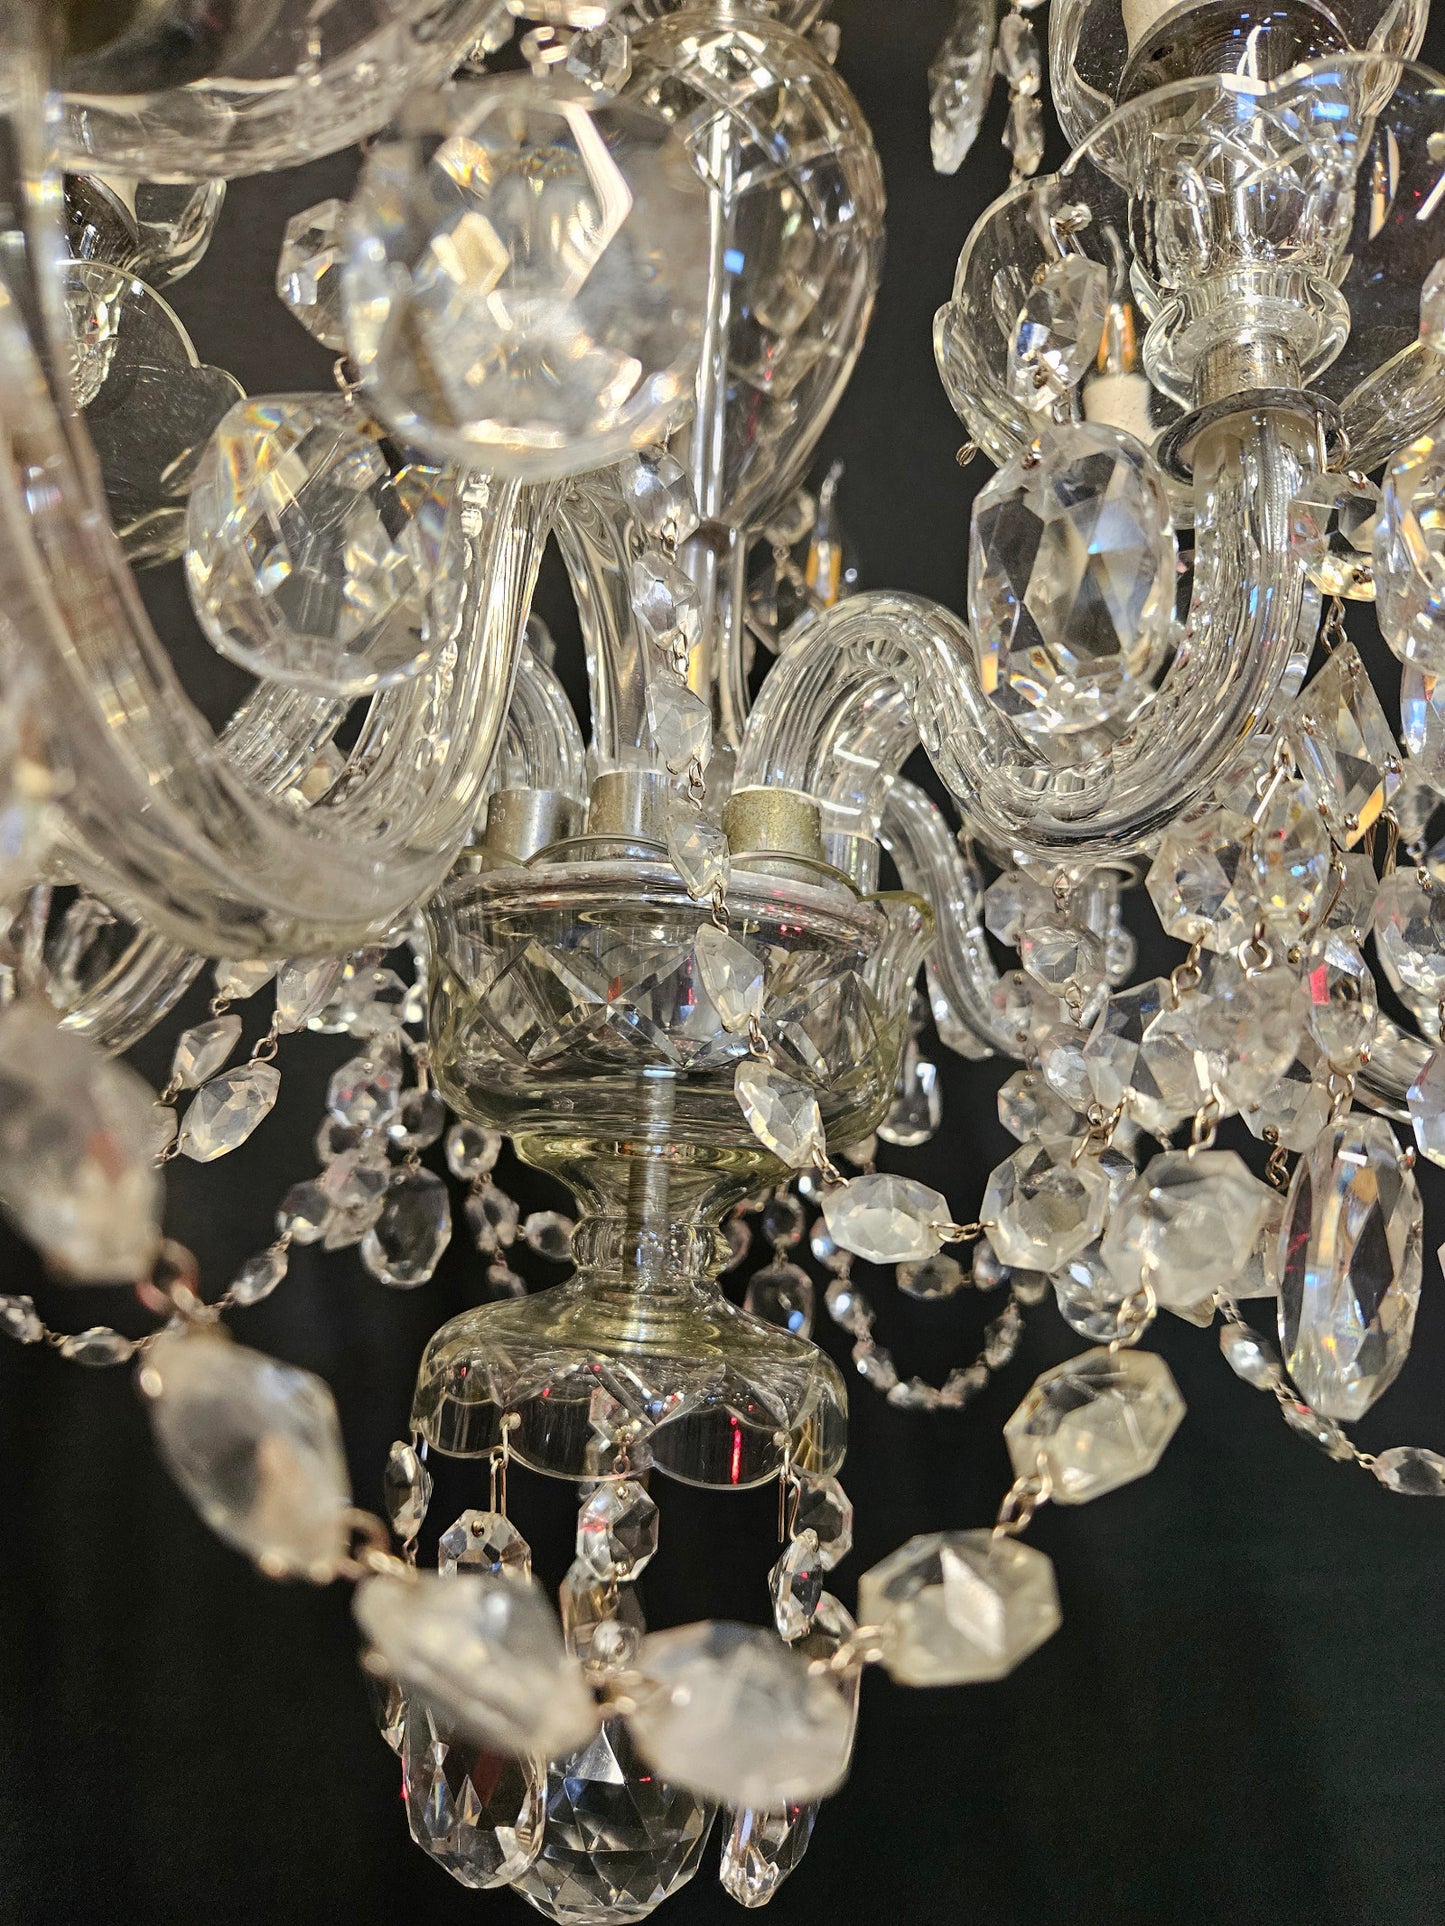 view of bottom part of chandelier